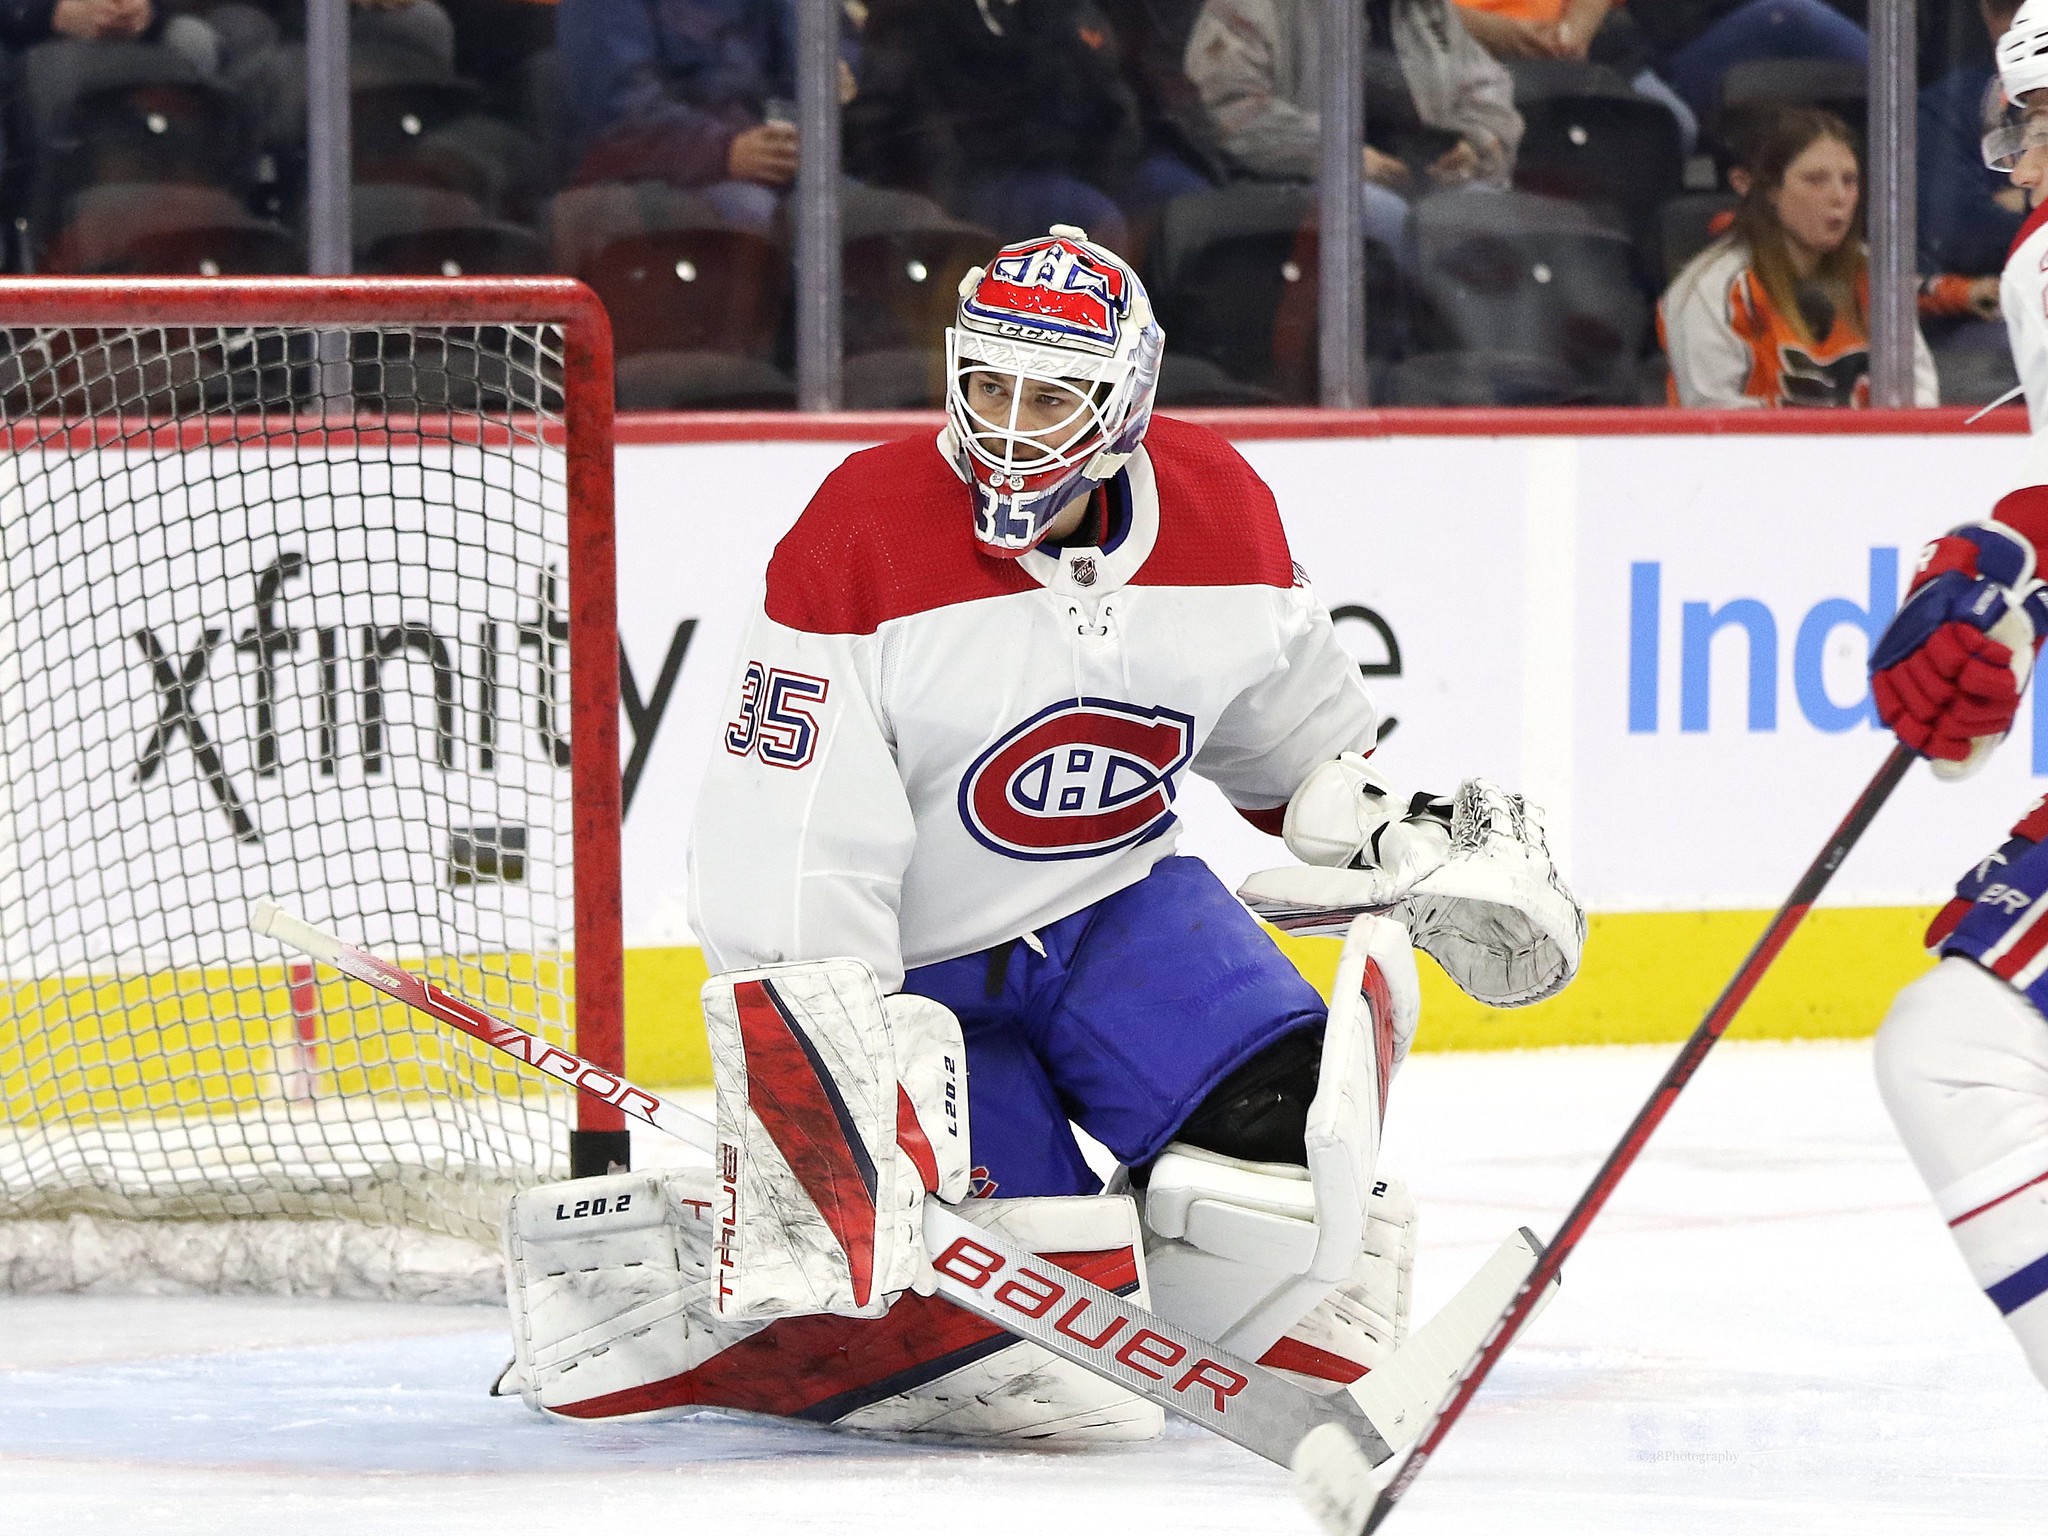 Search Results for “Montreal Canadiens” – SportsLogos.Net News